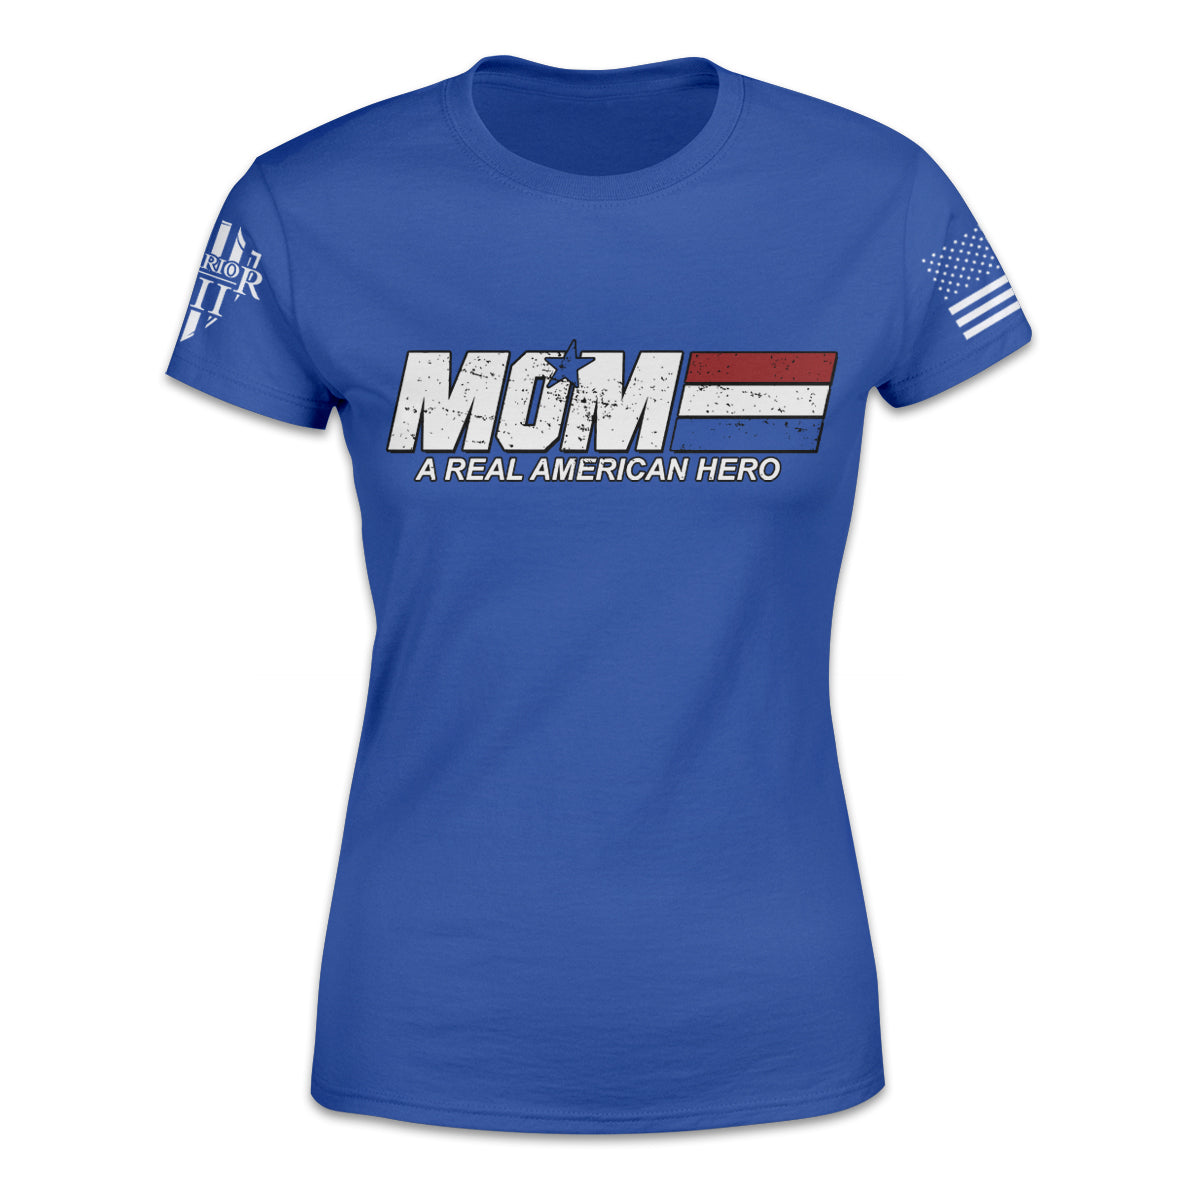 A blue women's relaxed fit'shirt with the words "Mom: A Real American Hero" printed on the front.